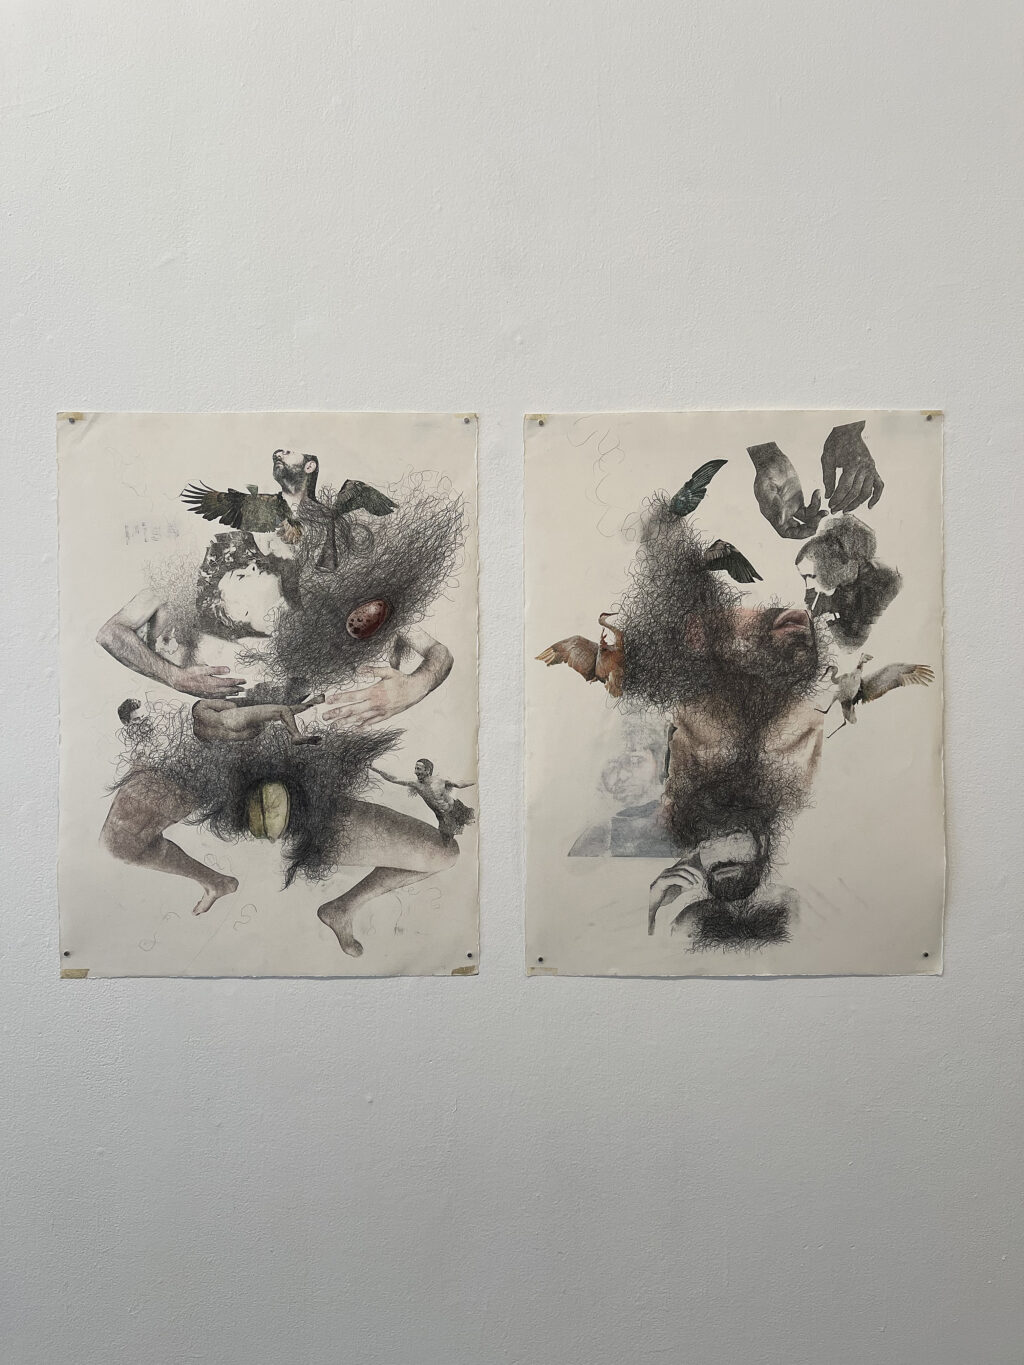 Drawings and prints by Oscar Chacon featuring the body and body hair turning into nest like tangles.